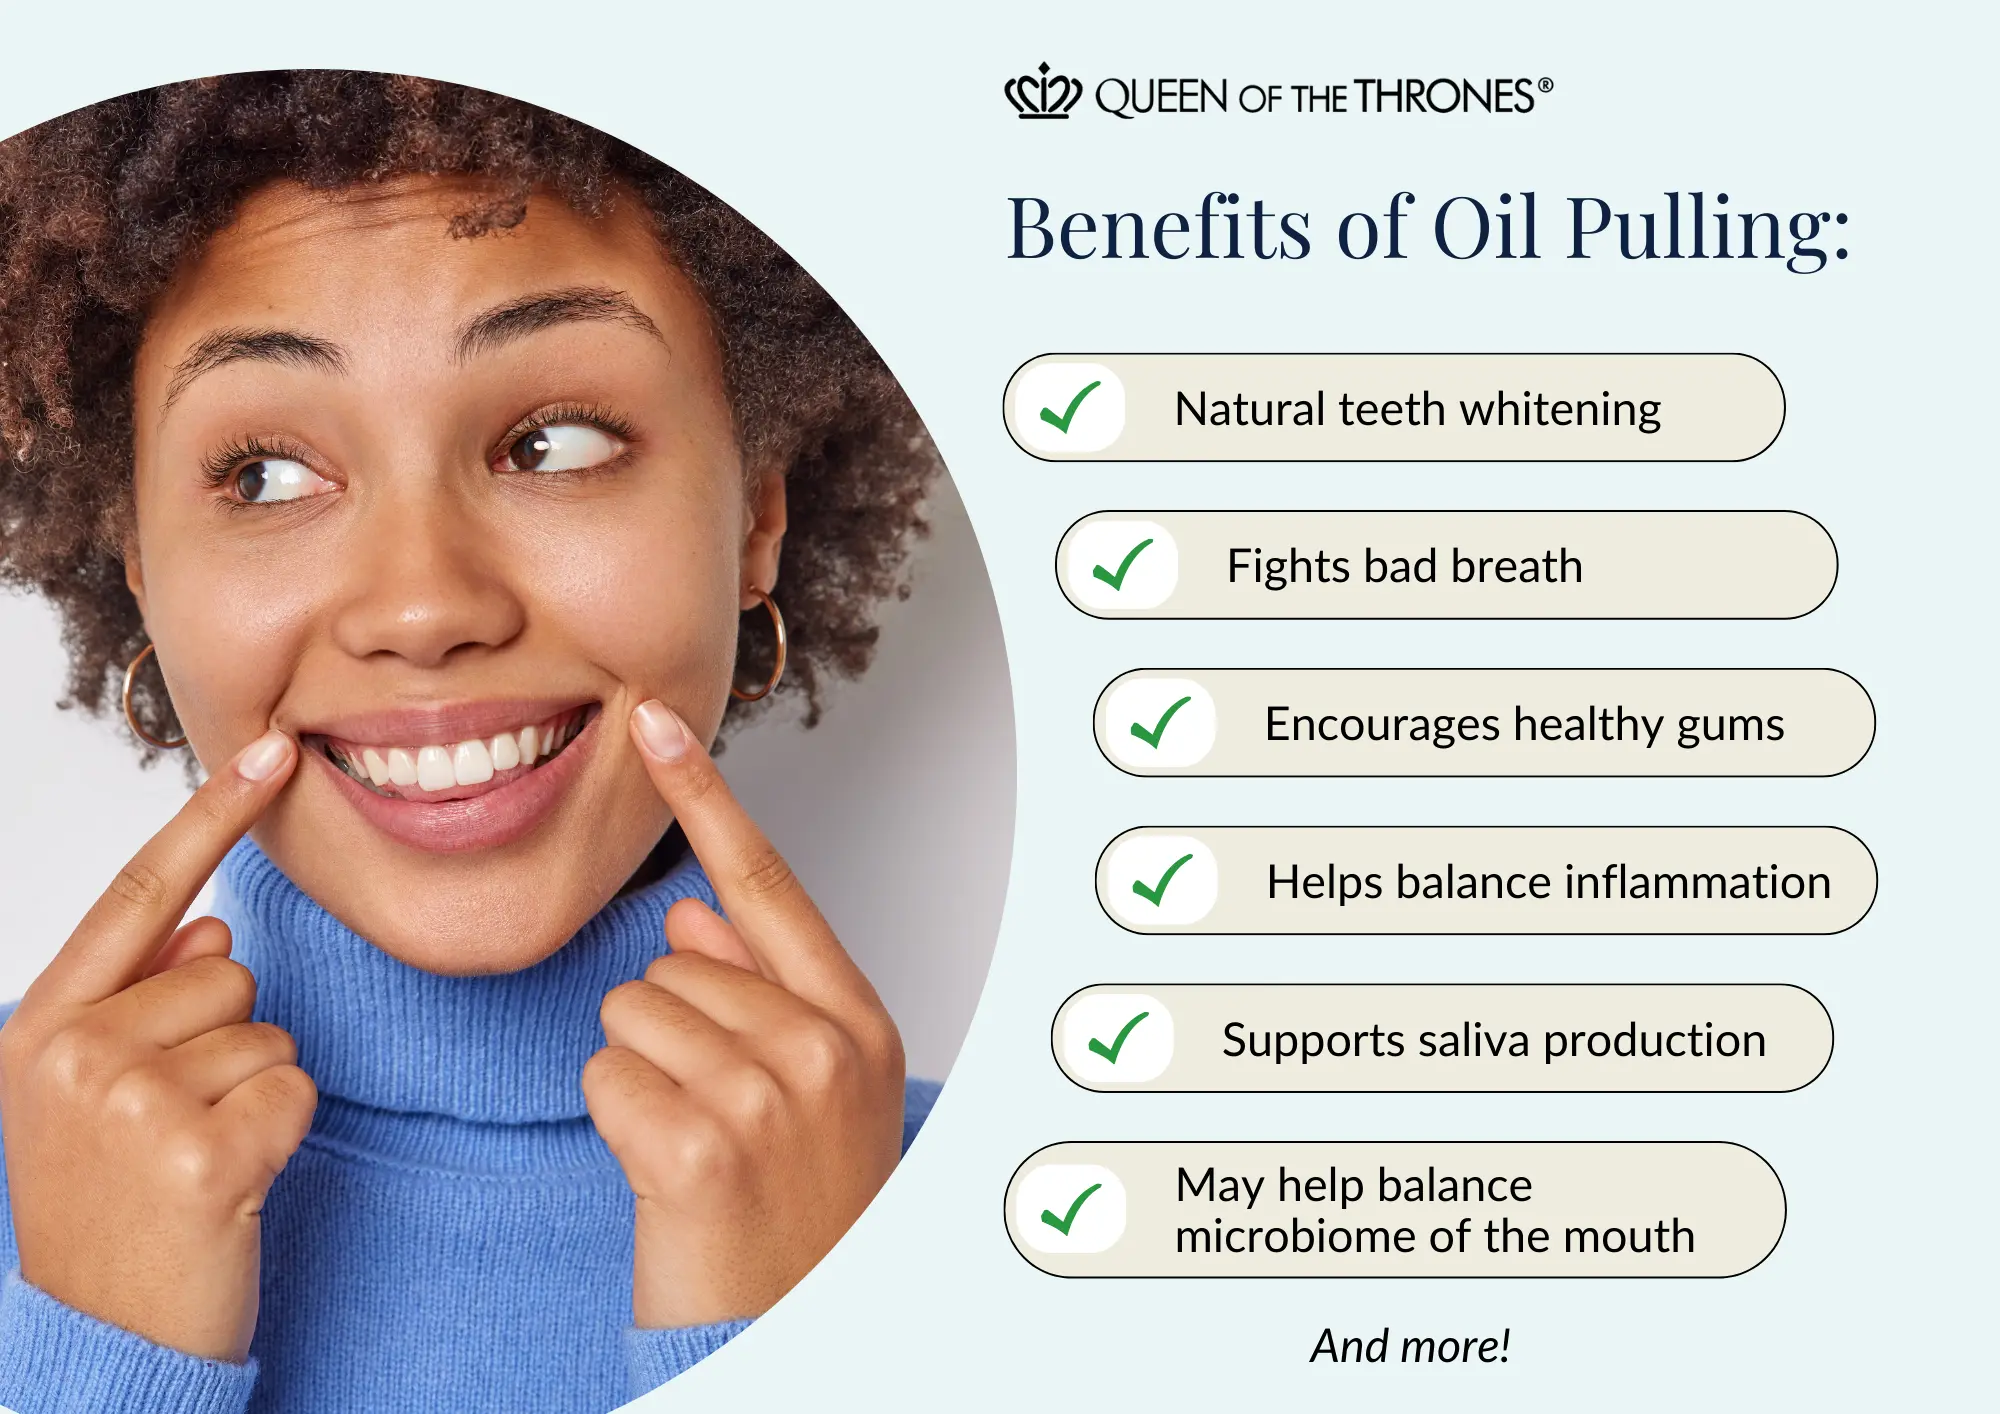 Benefits of Oil pulling by Queen of the Thrones